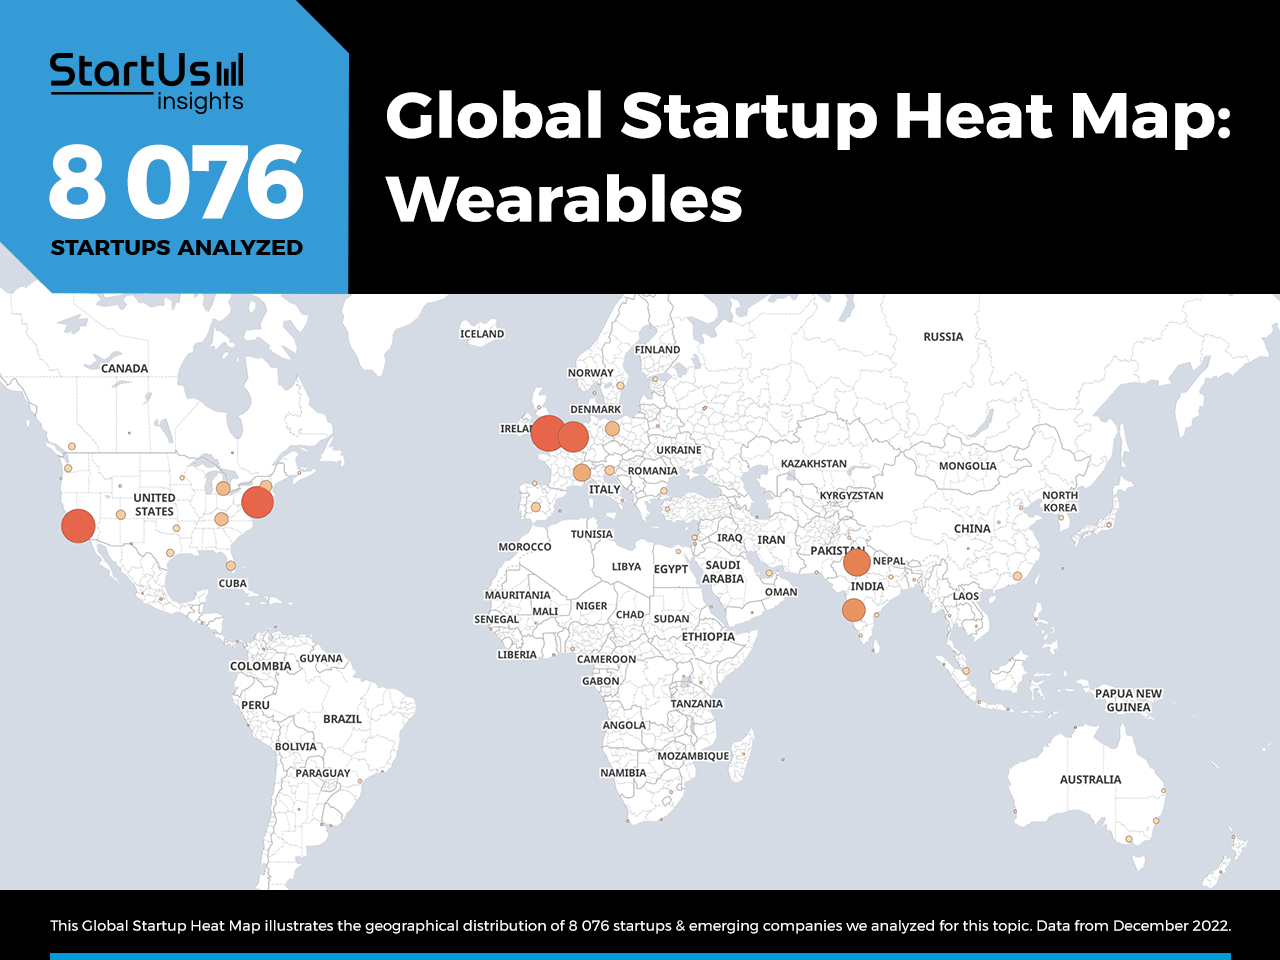 Wearables-Heat-Map-StartUs-Insights-noresize